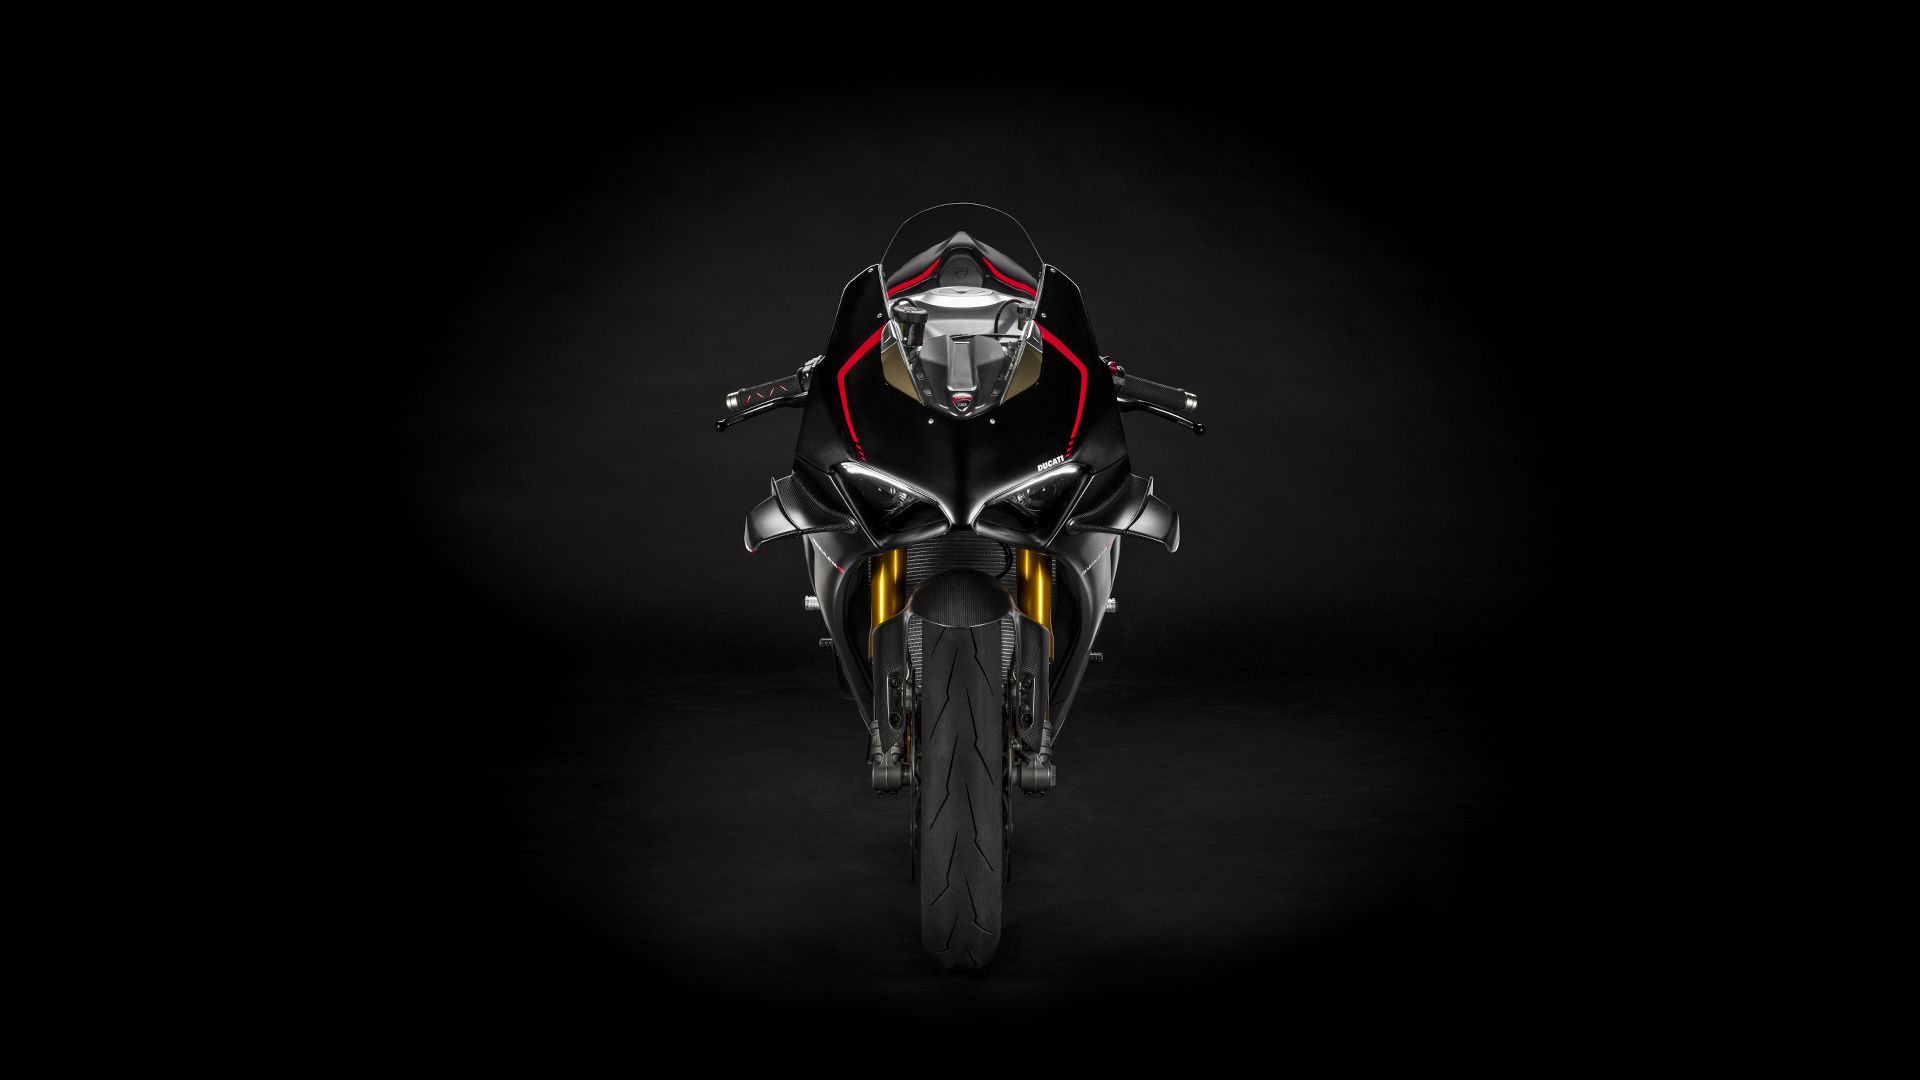 Ducati Panigale V4 SP [Specs, Features, Photo]